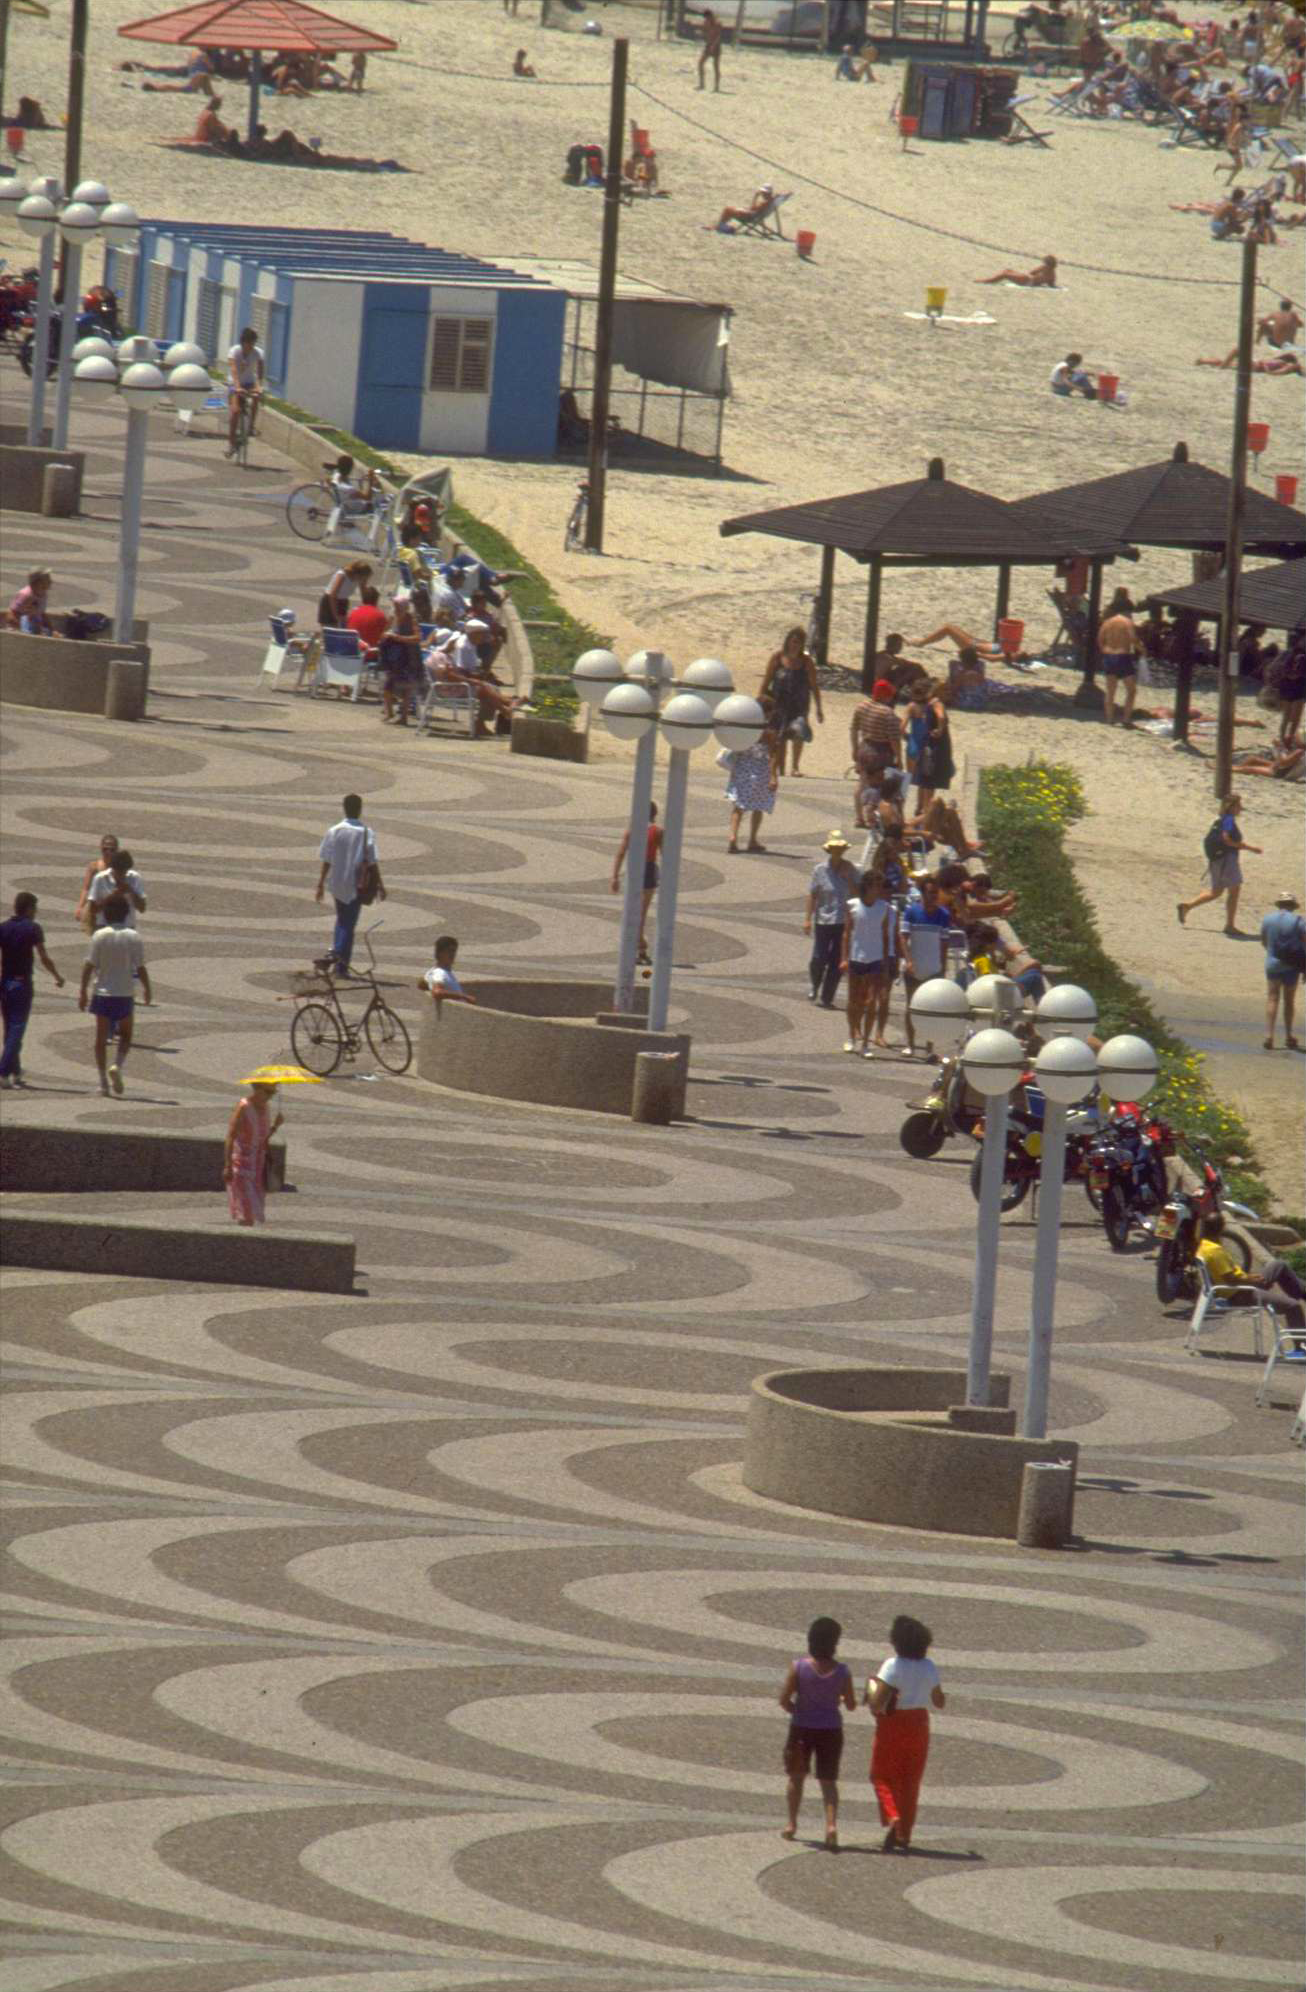 Photograph featuring a promenade alongside a beach with people walking and sitting, with several sets of lightposts and circular benches.